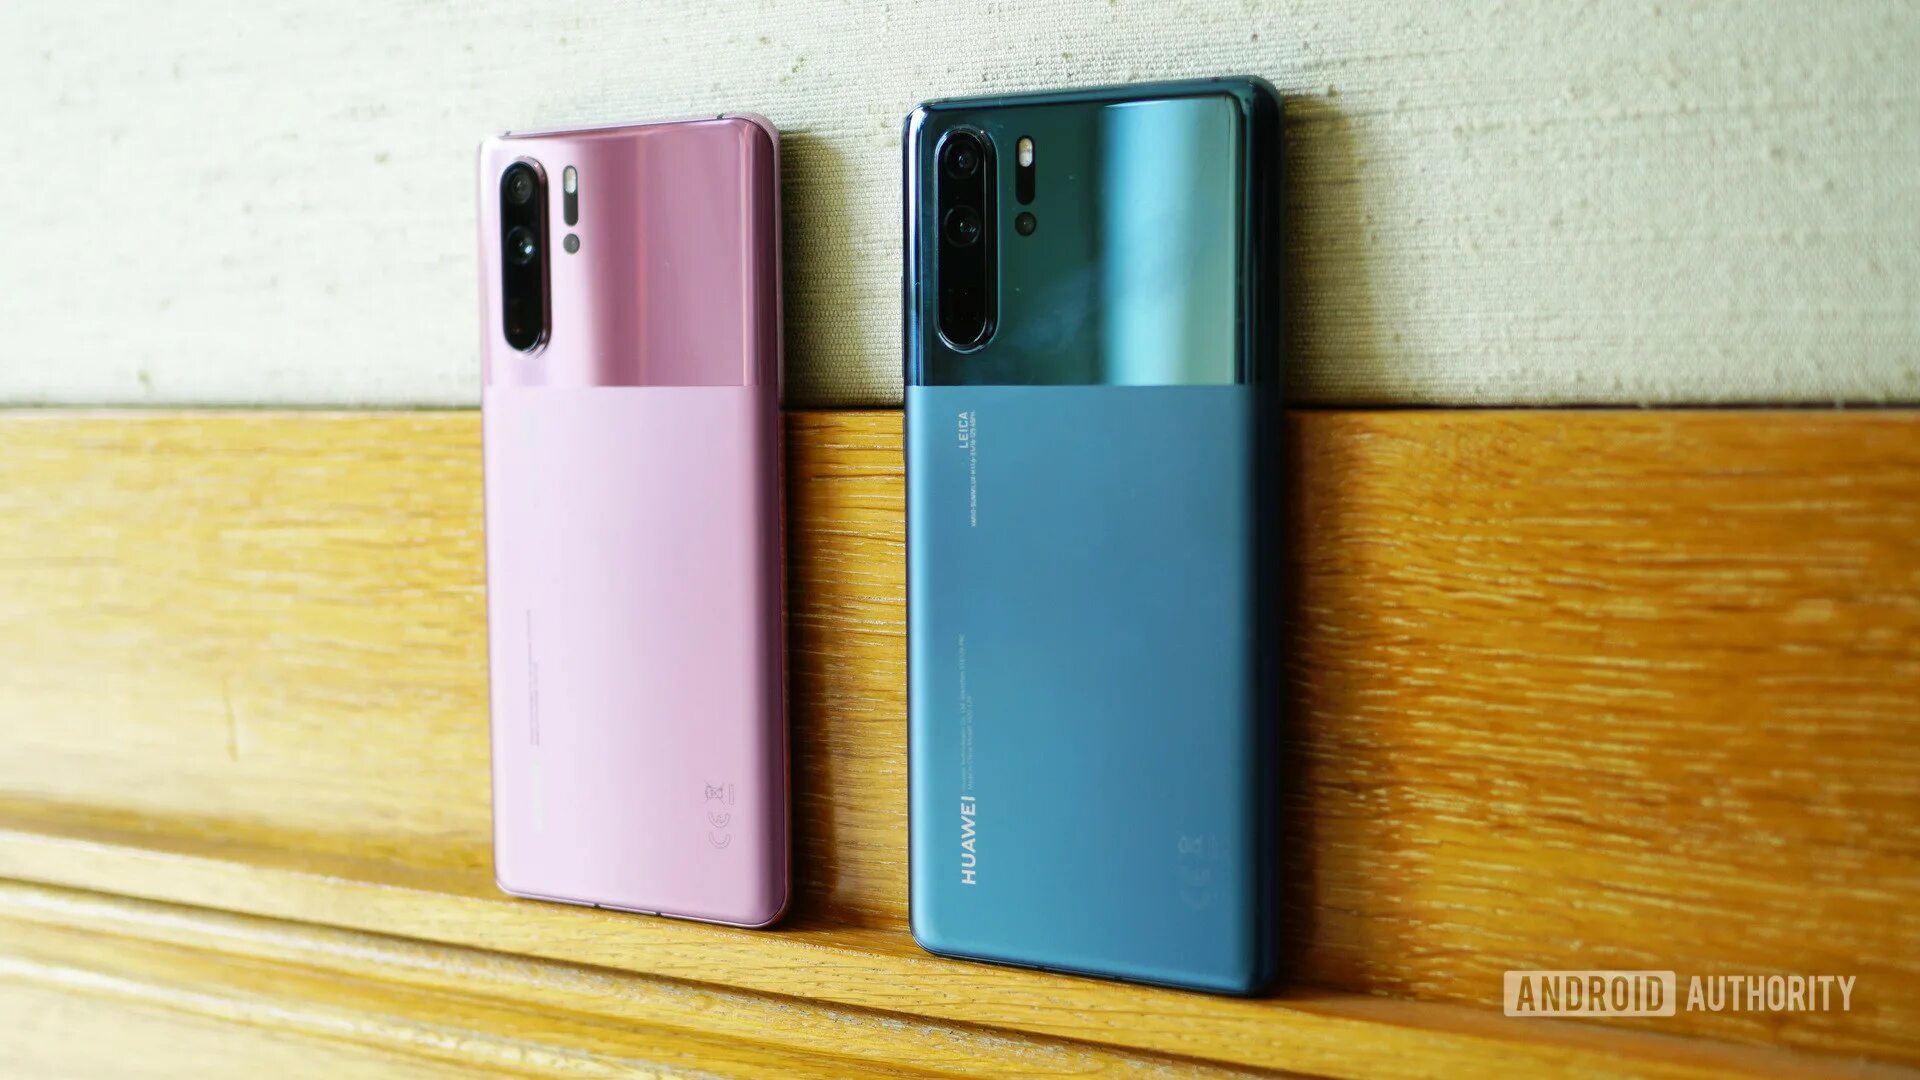 Huawei p30 Pro New Edition. Huawei p30 Pro цвета. Huawei p30 Pro New Edition main Wallpaper. Huawei new edition